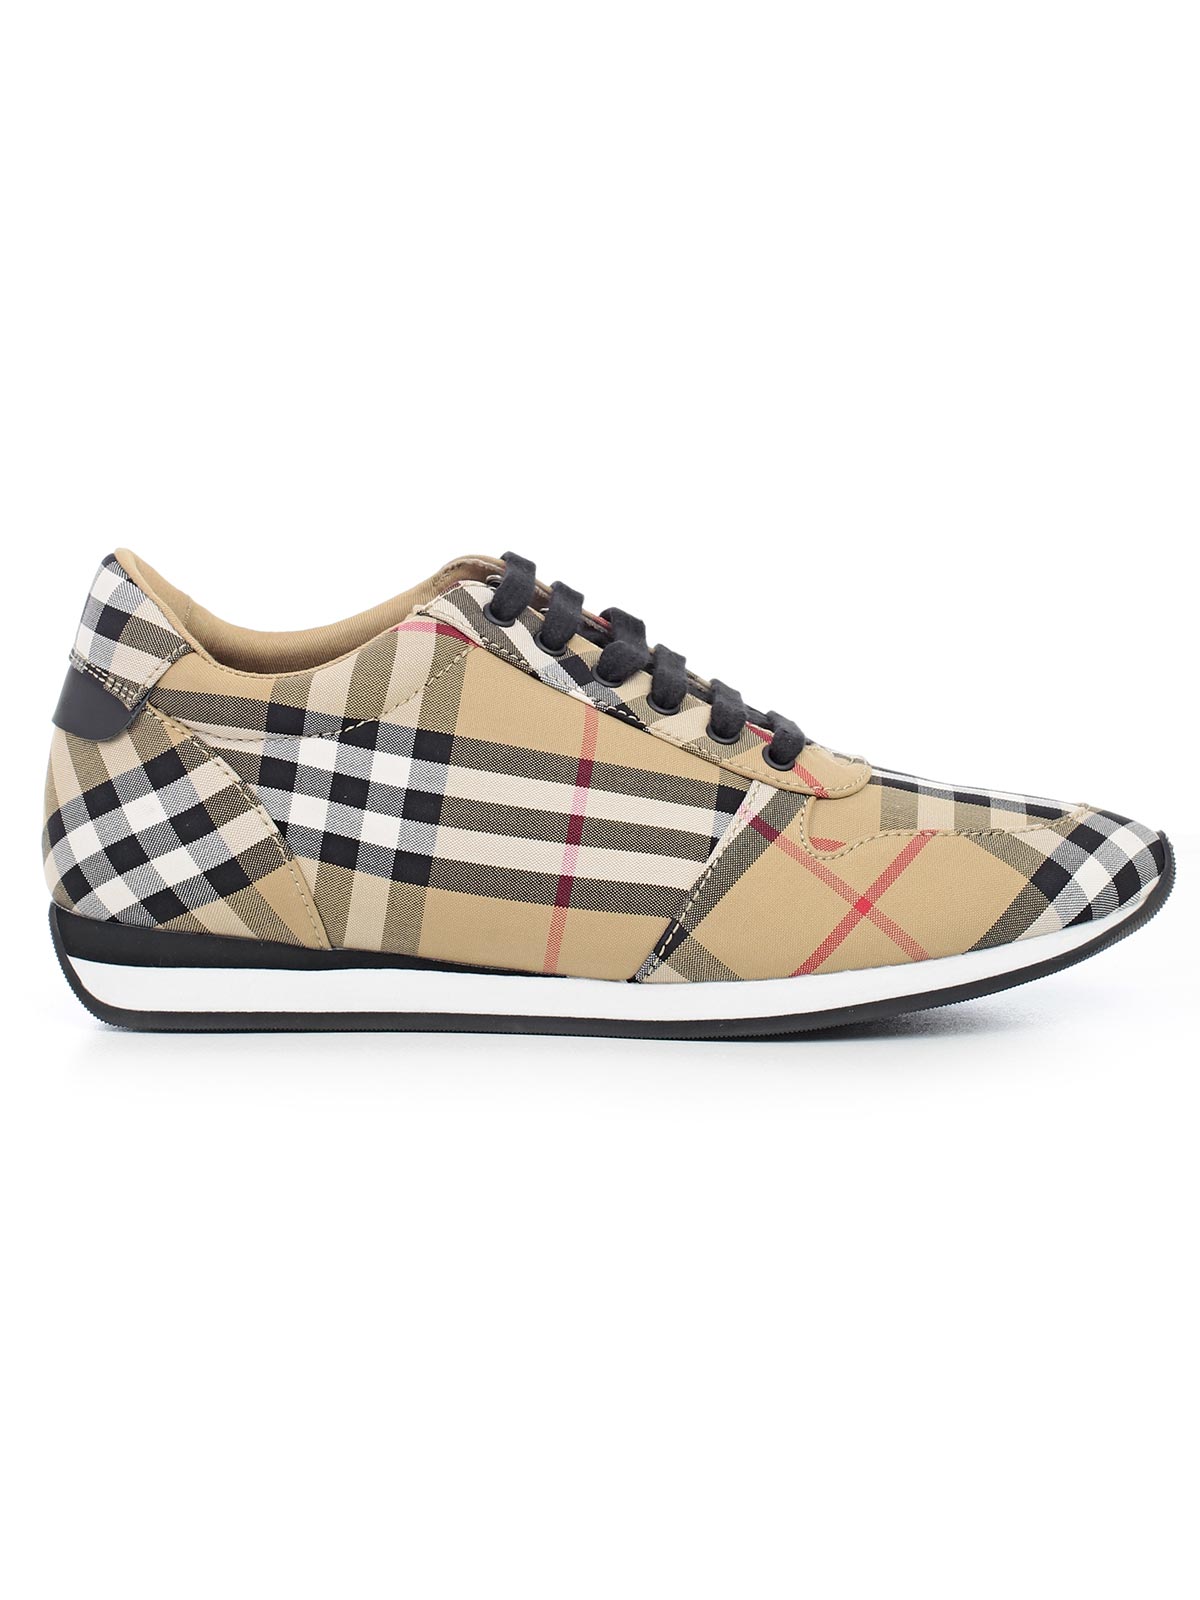 burberry sneakers womens yellow